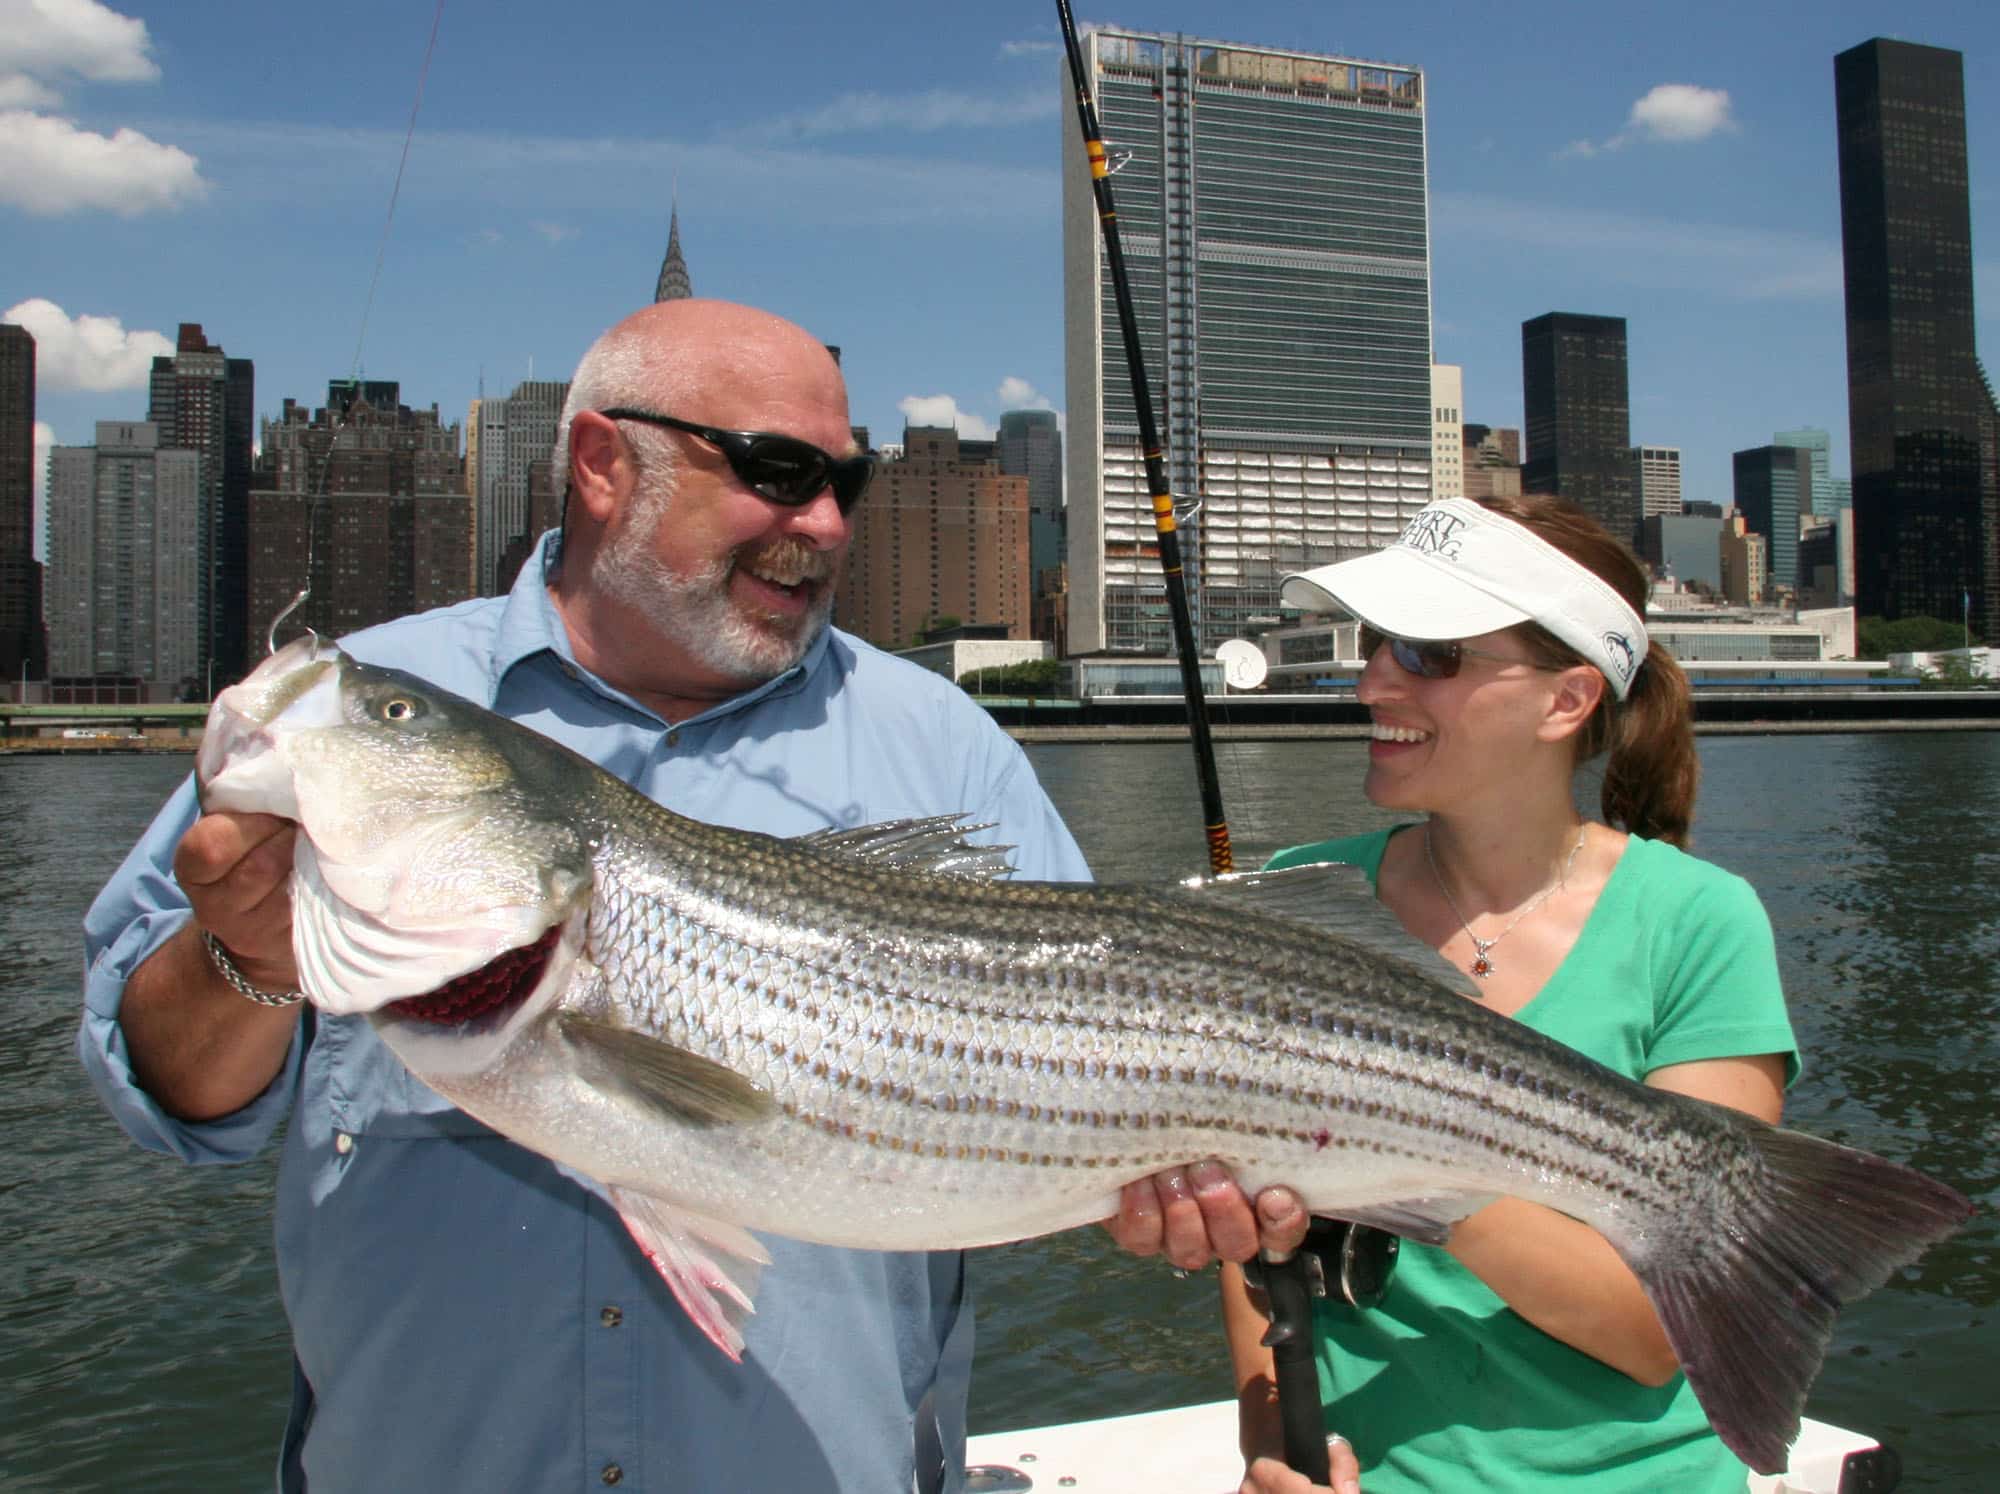 In 2021, a new regulation requires using inline circle hooks when fishing  for striped bass